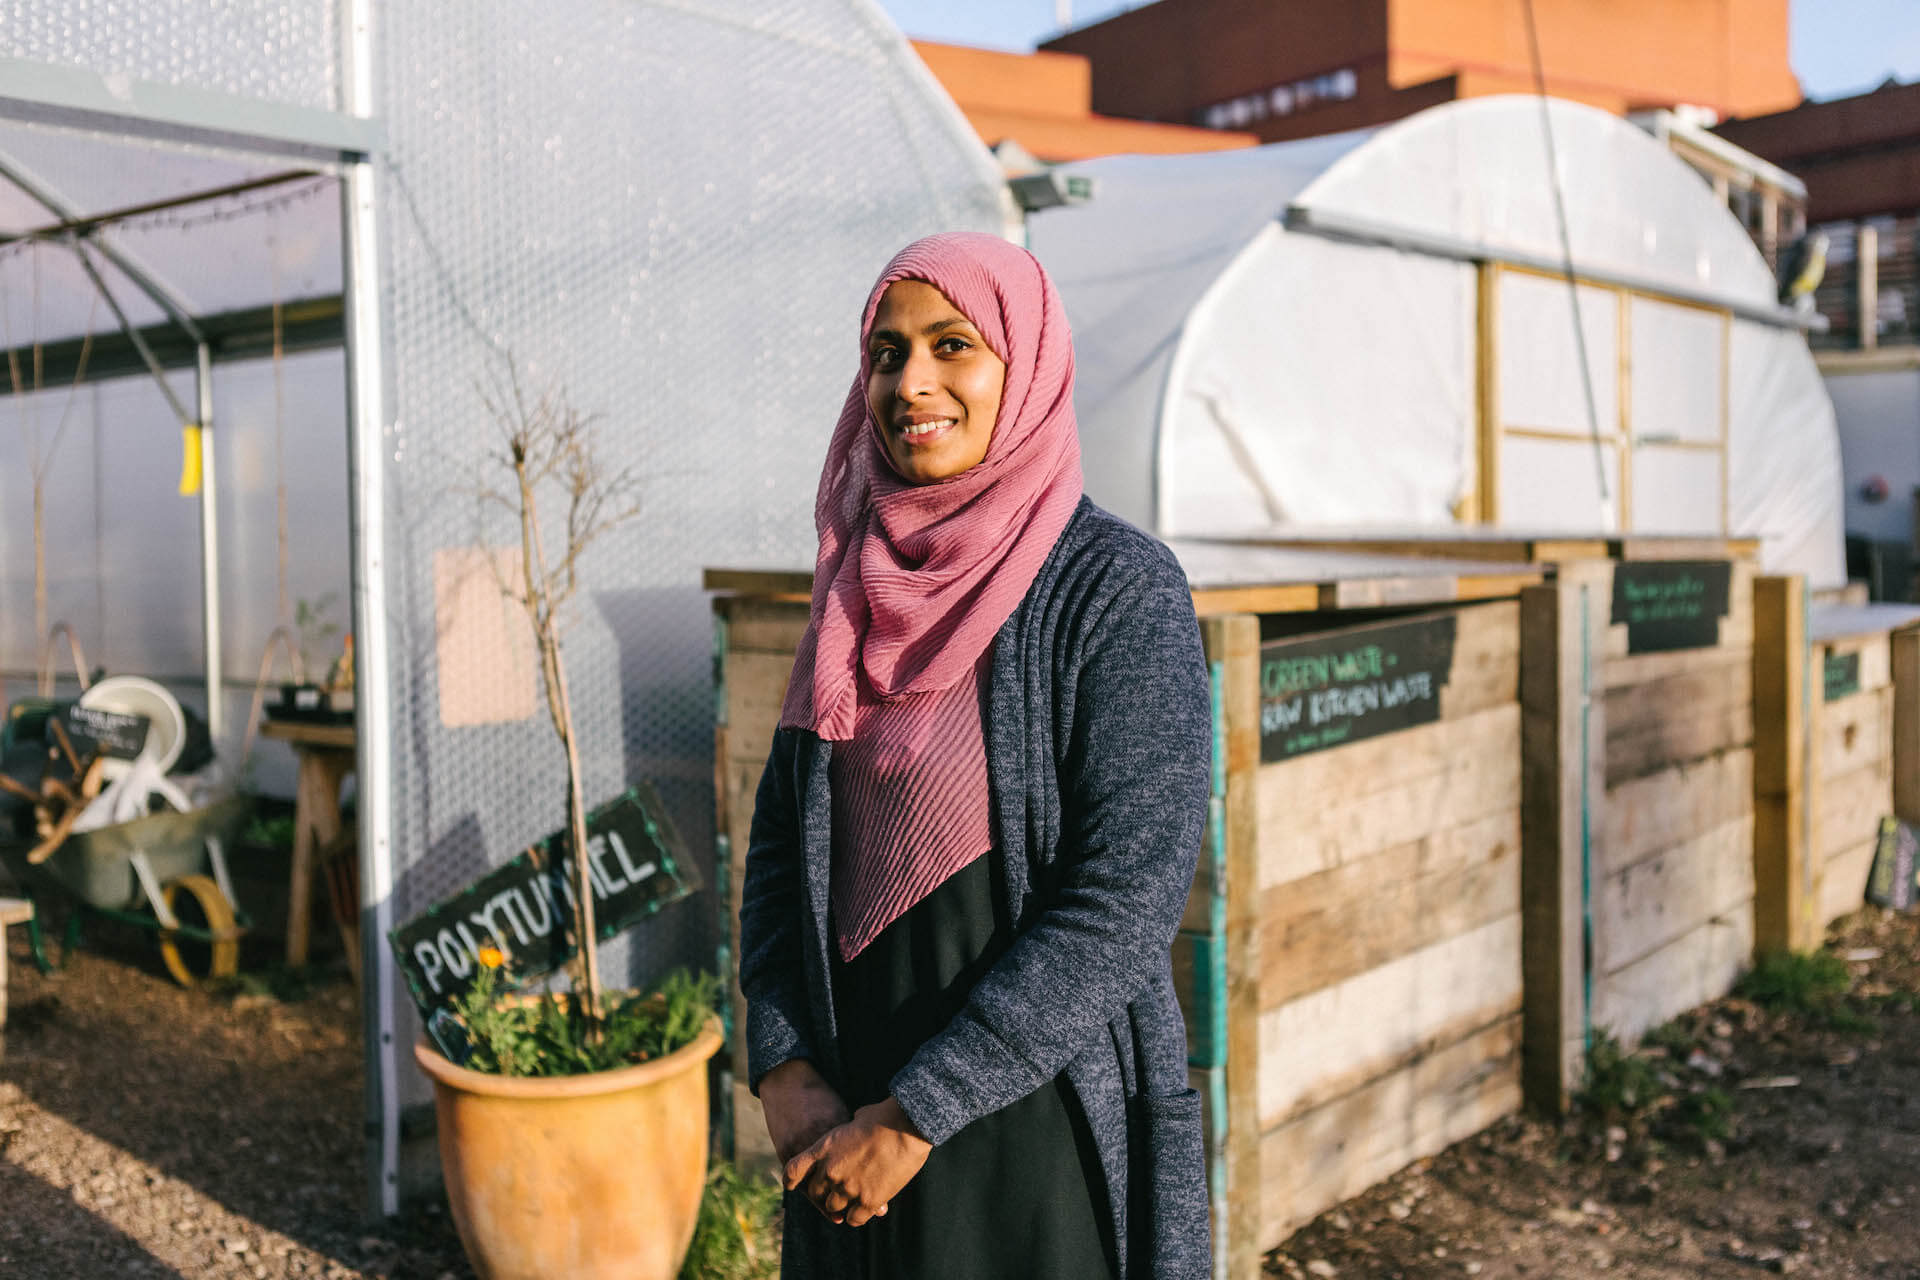 Salina Khatun, the founder of Read and Play, standing by some polytunnels